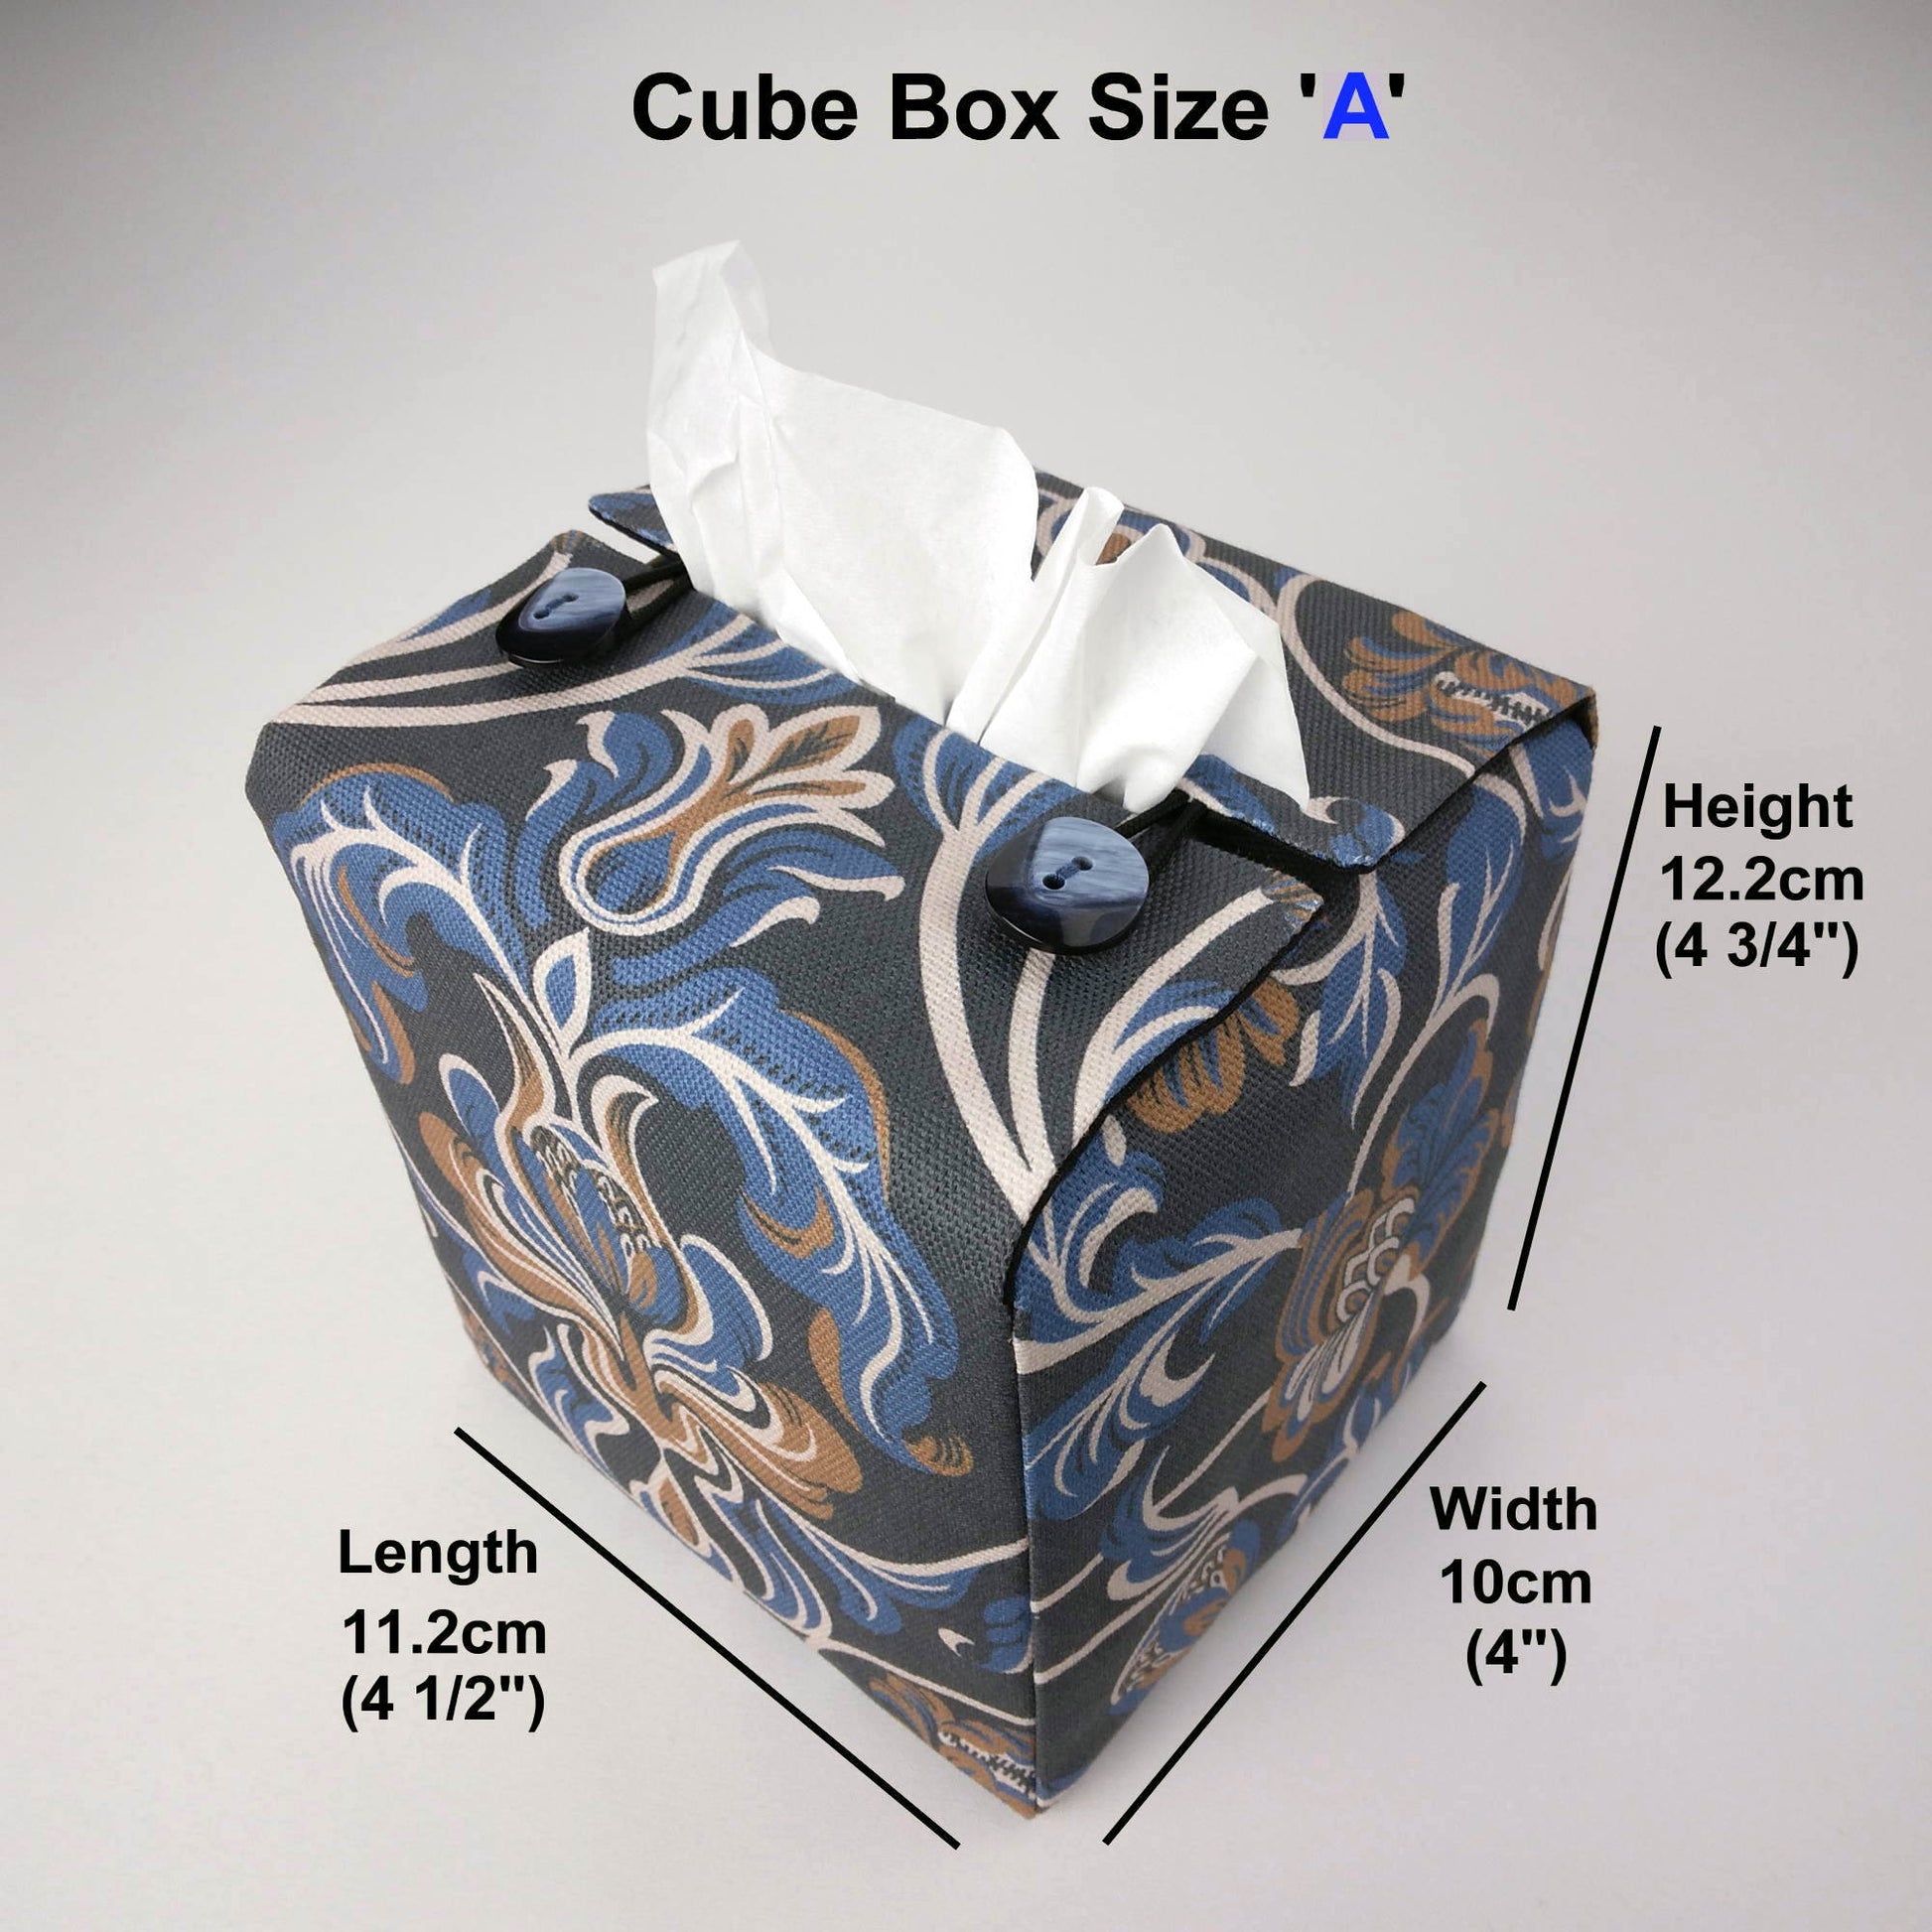 Square tissue box cover with white, brown, and blue baroque style floral design on navy background